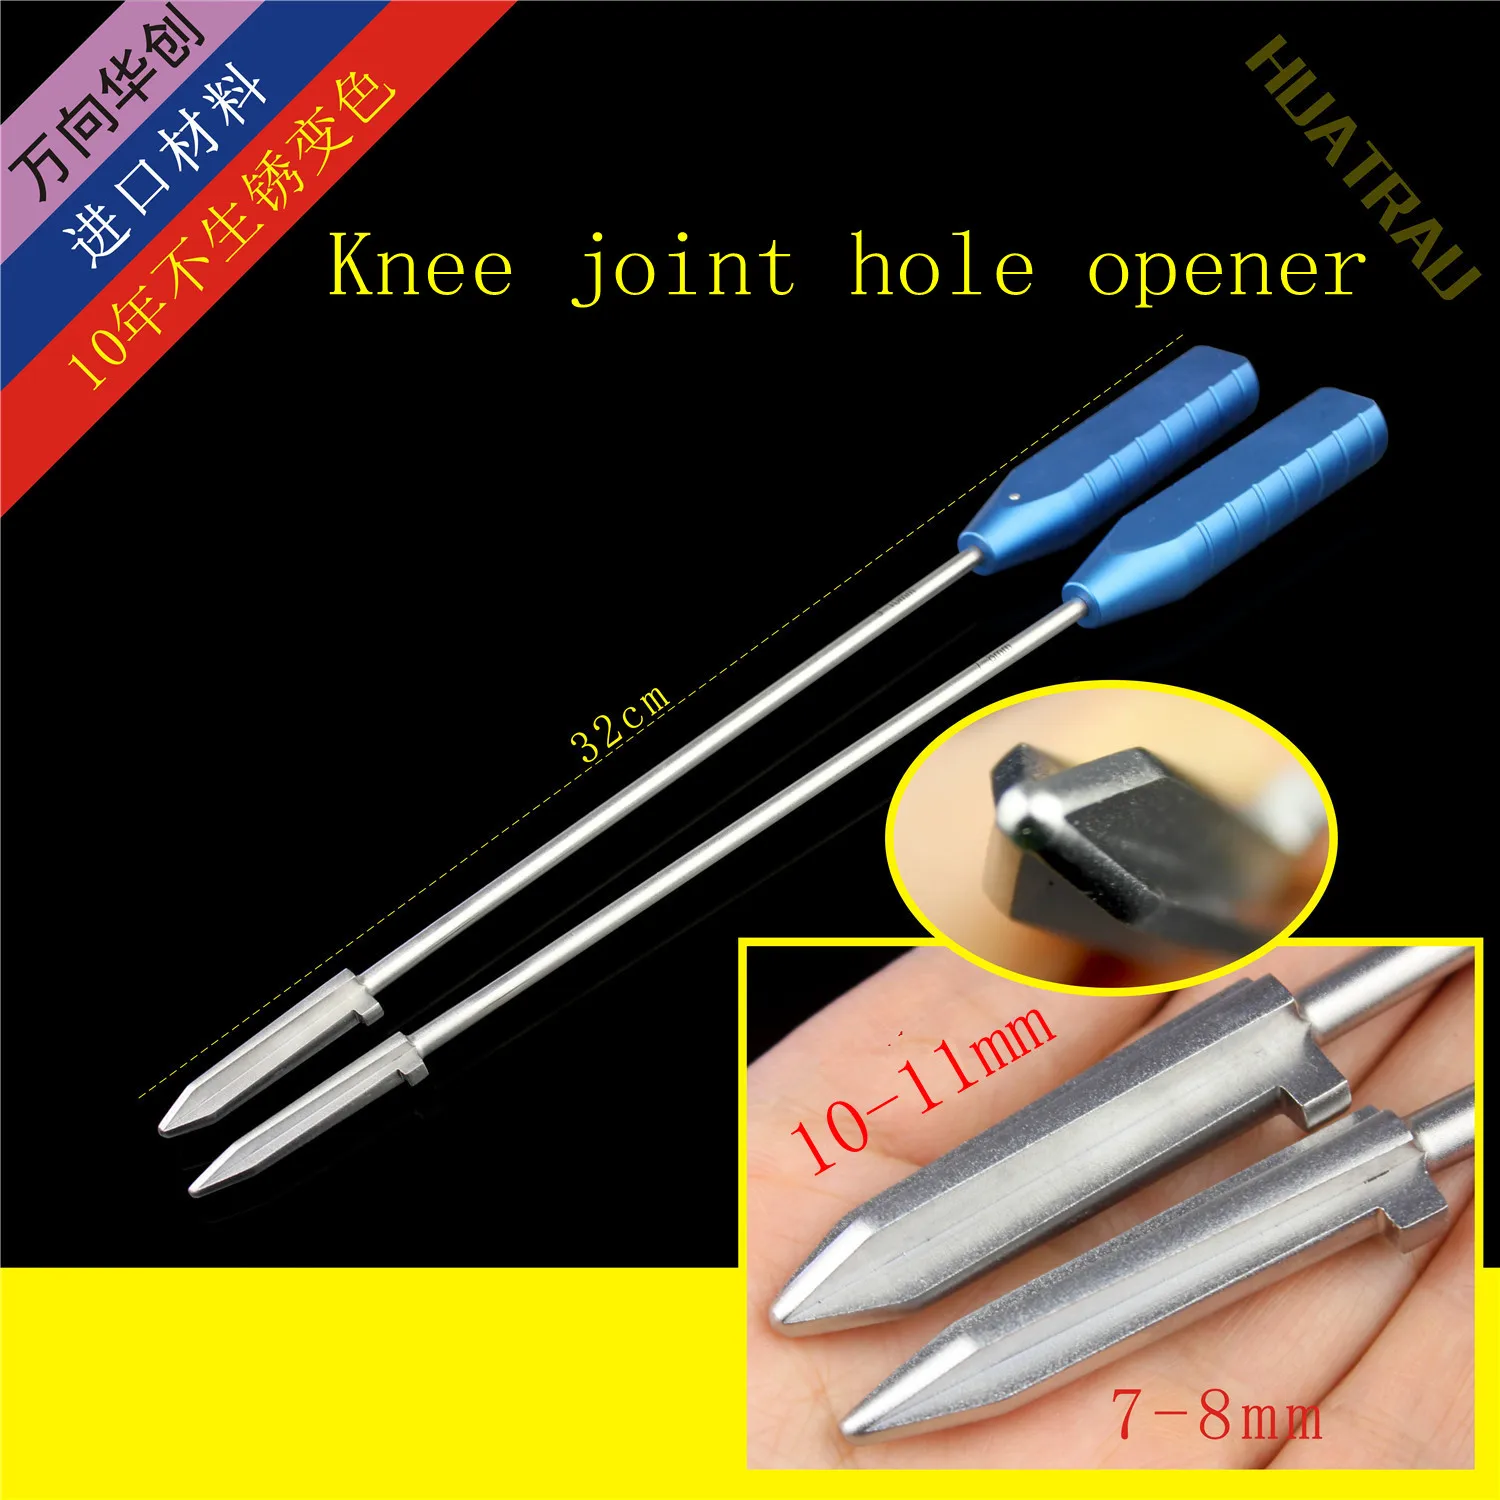 

Knee joint opening cone cruciate ligament hollow opener device orthopedic instruments sports medicine medical caunnulated reamer